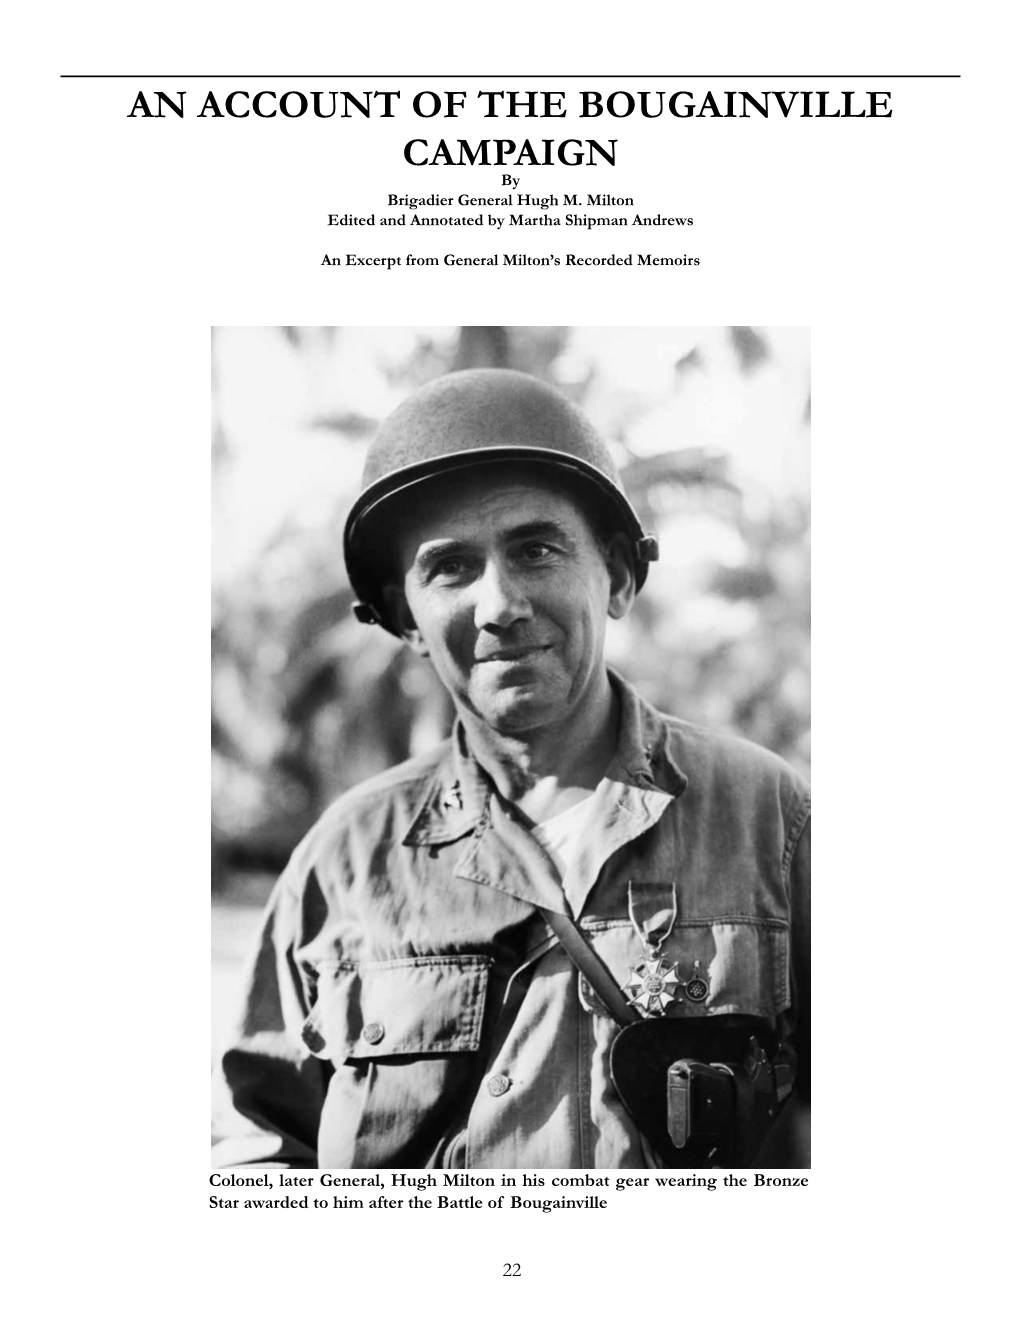 AN ACCOUNT of the BOUGAINVILLE CAMPAIGN by Brigadier General Hugh M